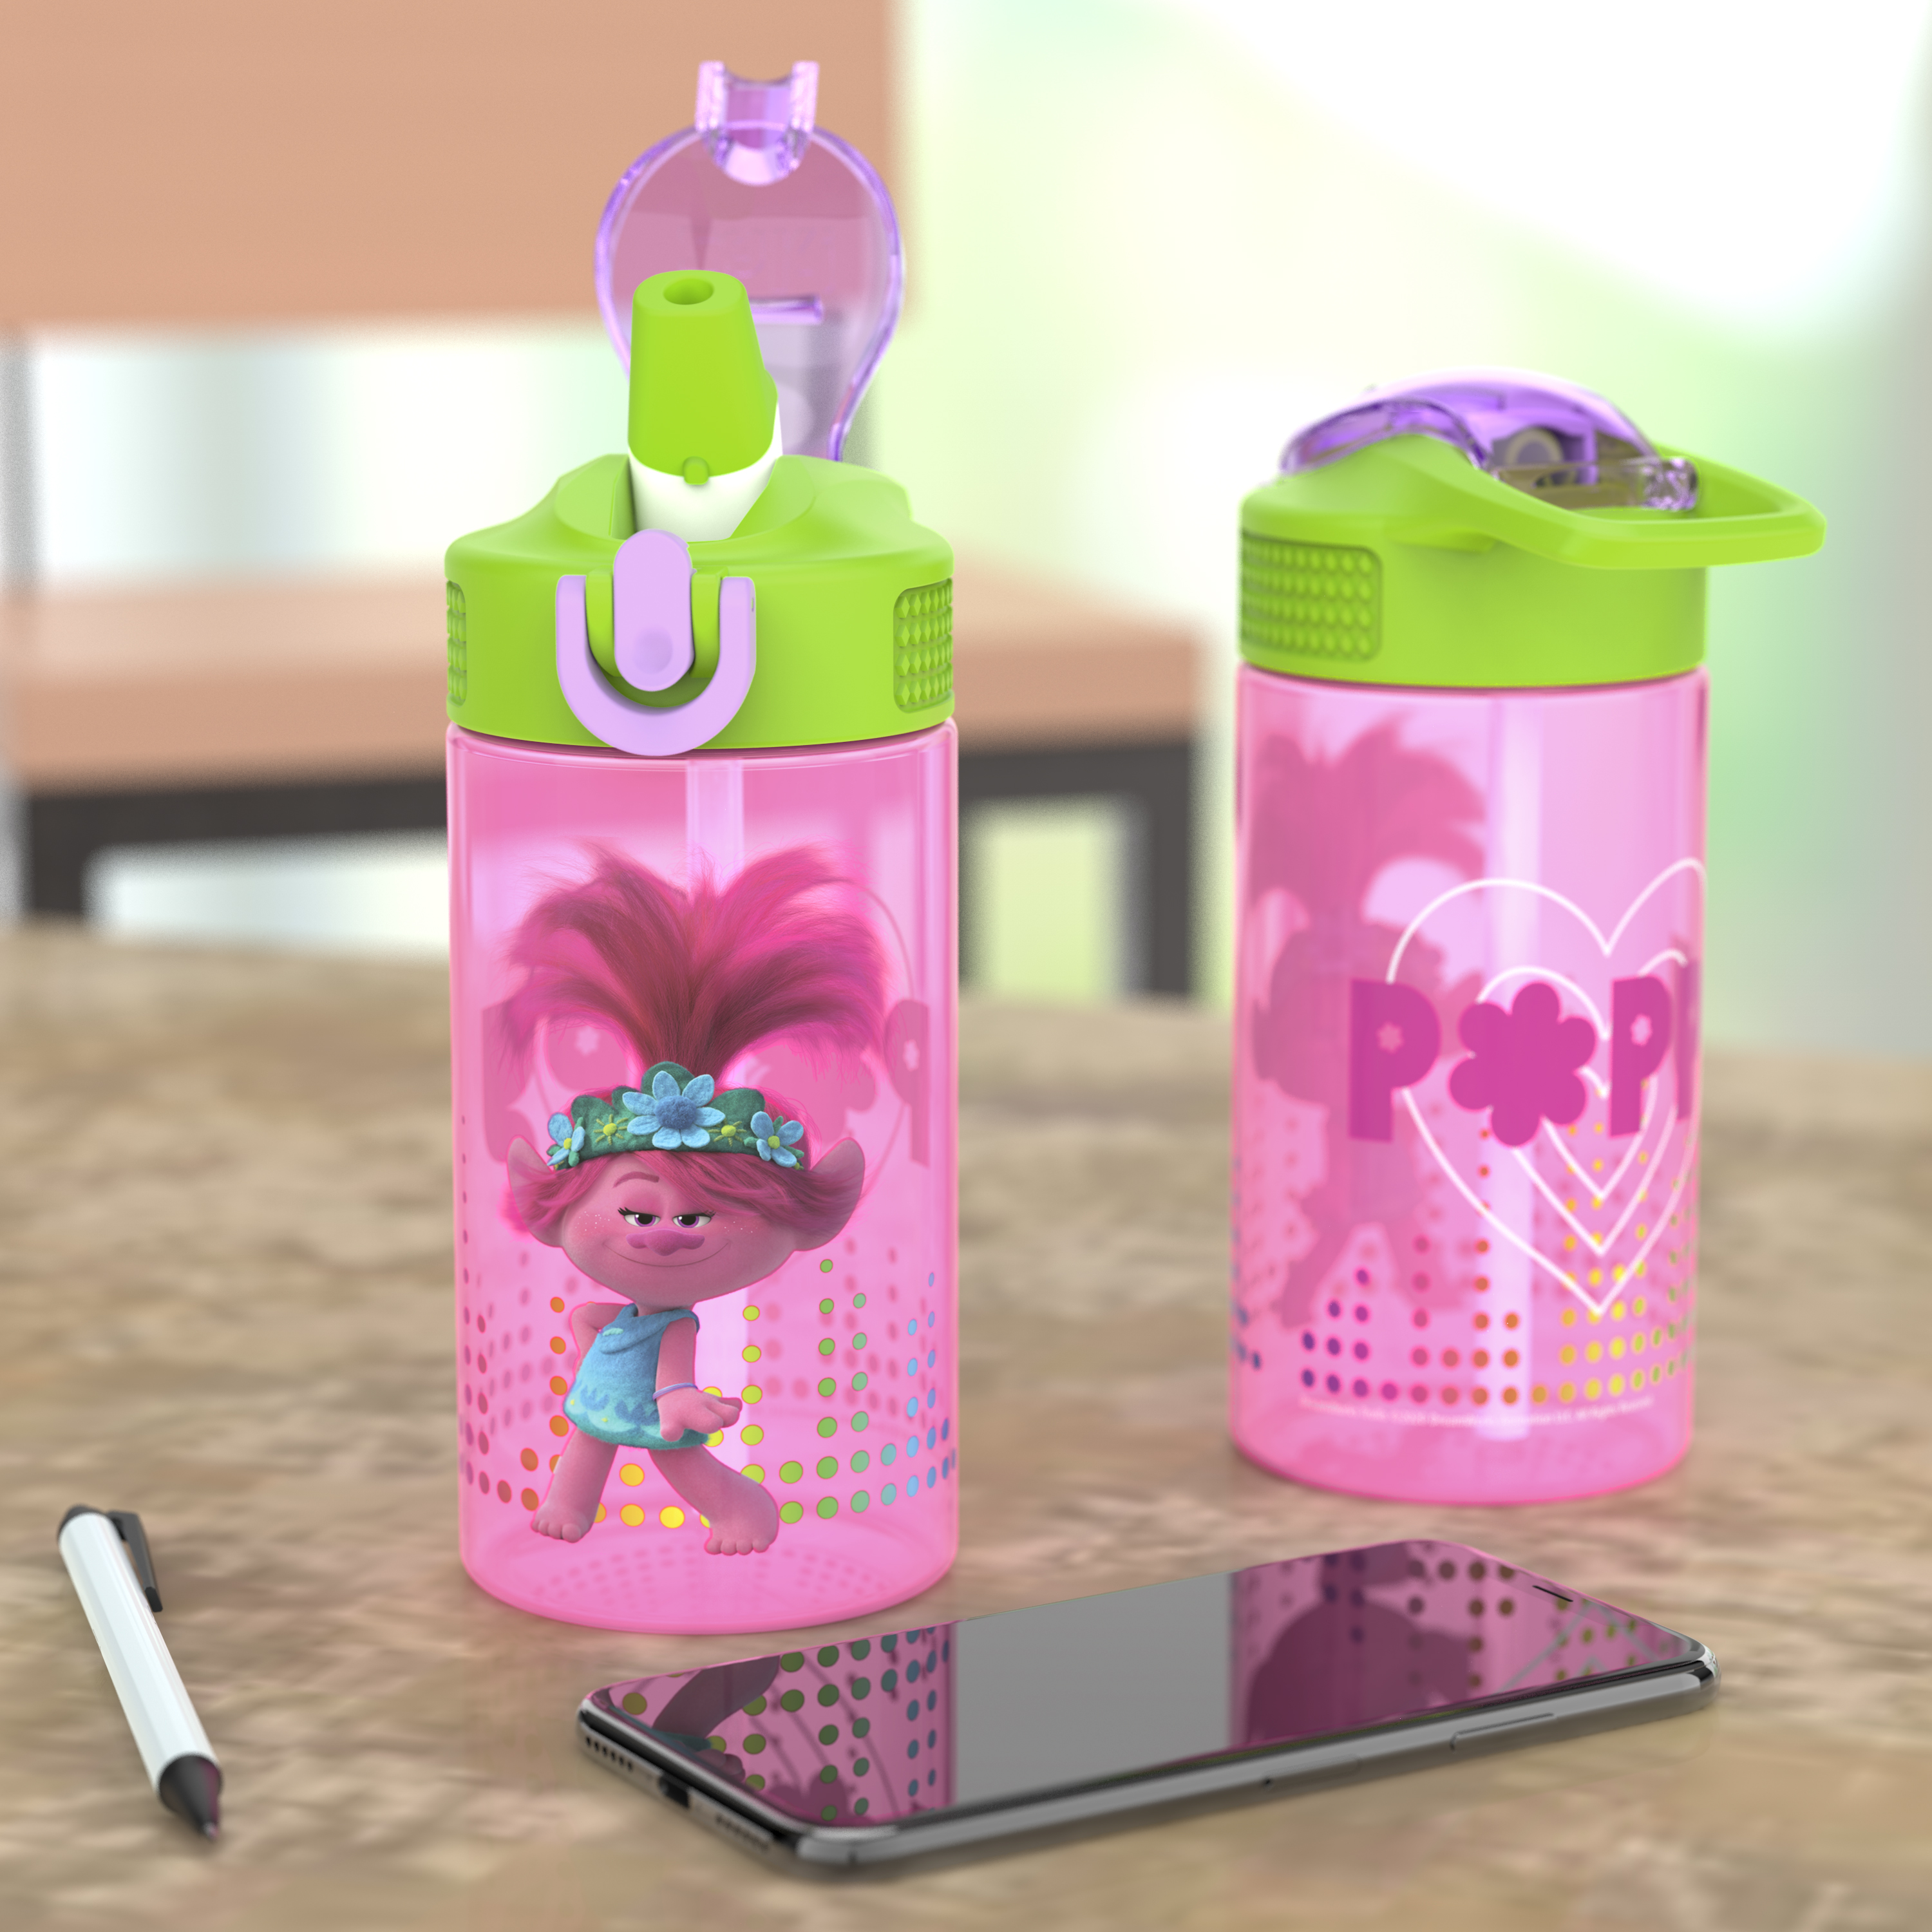 Trolls 2 Movie 16 ounce Reusable Plastic Water Bottle with Straw, Poppy, 2-piece set slideshow image 8